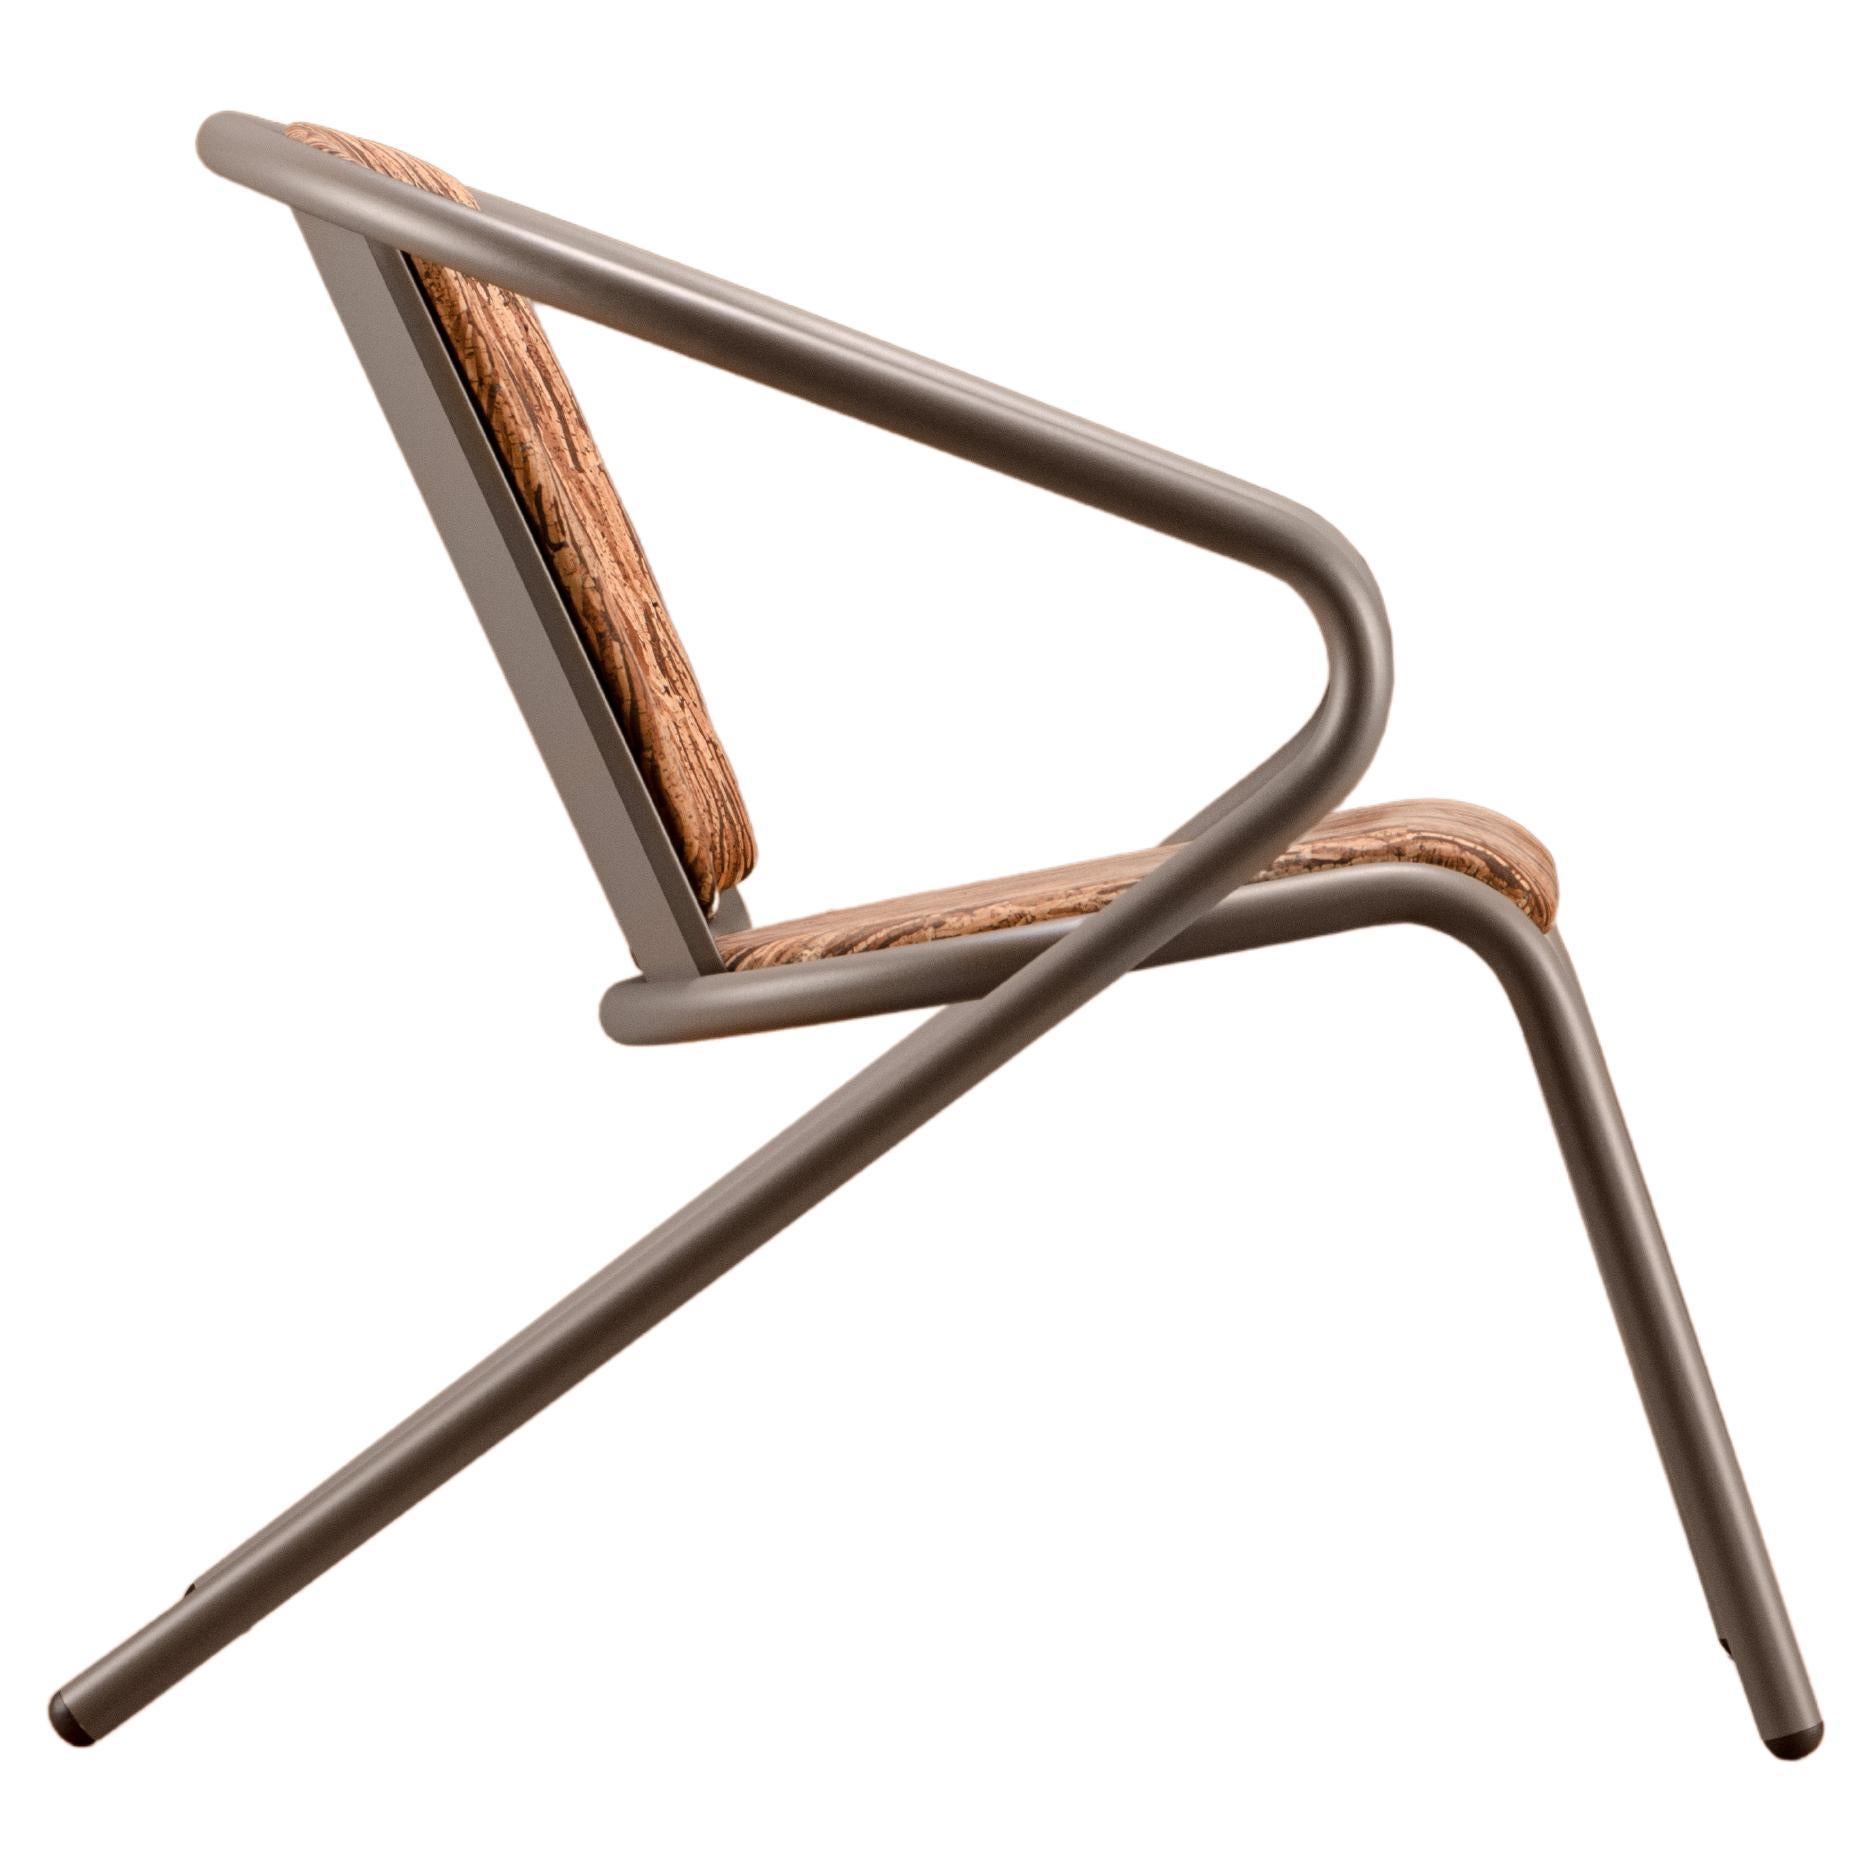 Bicalounge Modern Steel Lounge Chair Oxidized Bark, Upholstery in Natural Cork For Sale